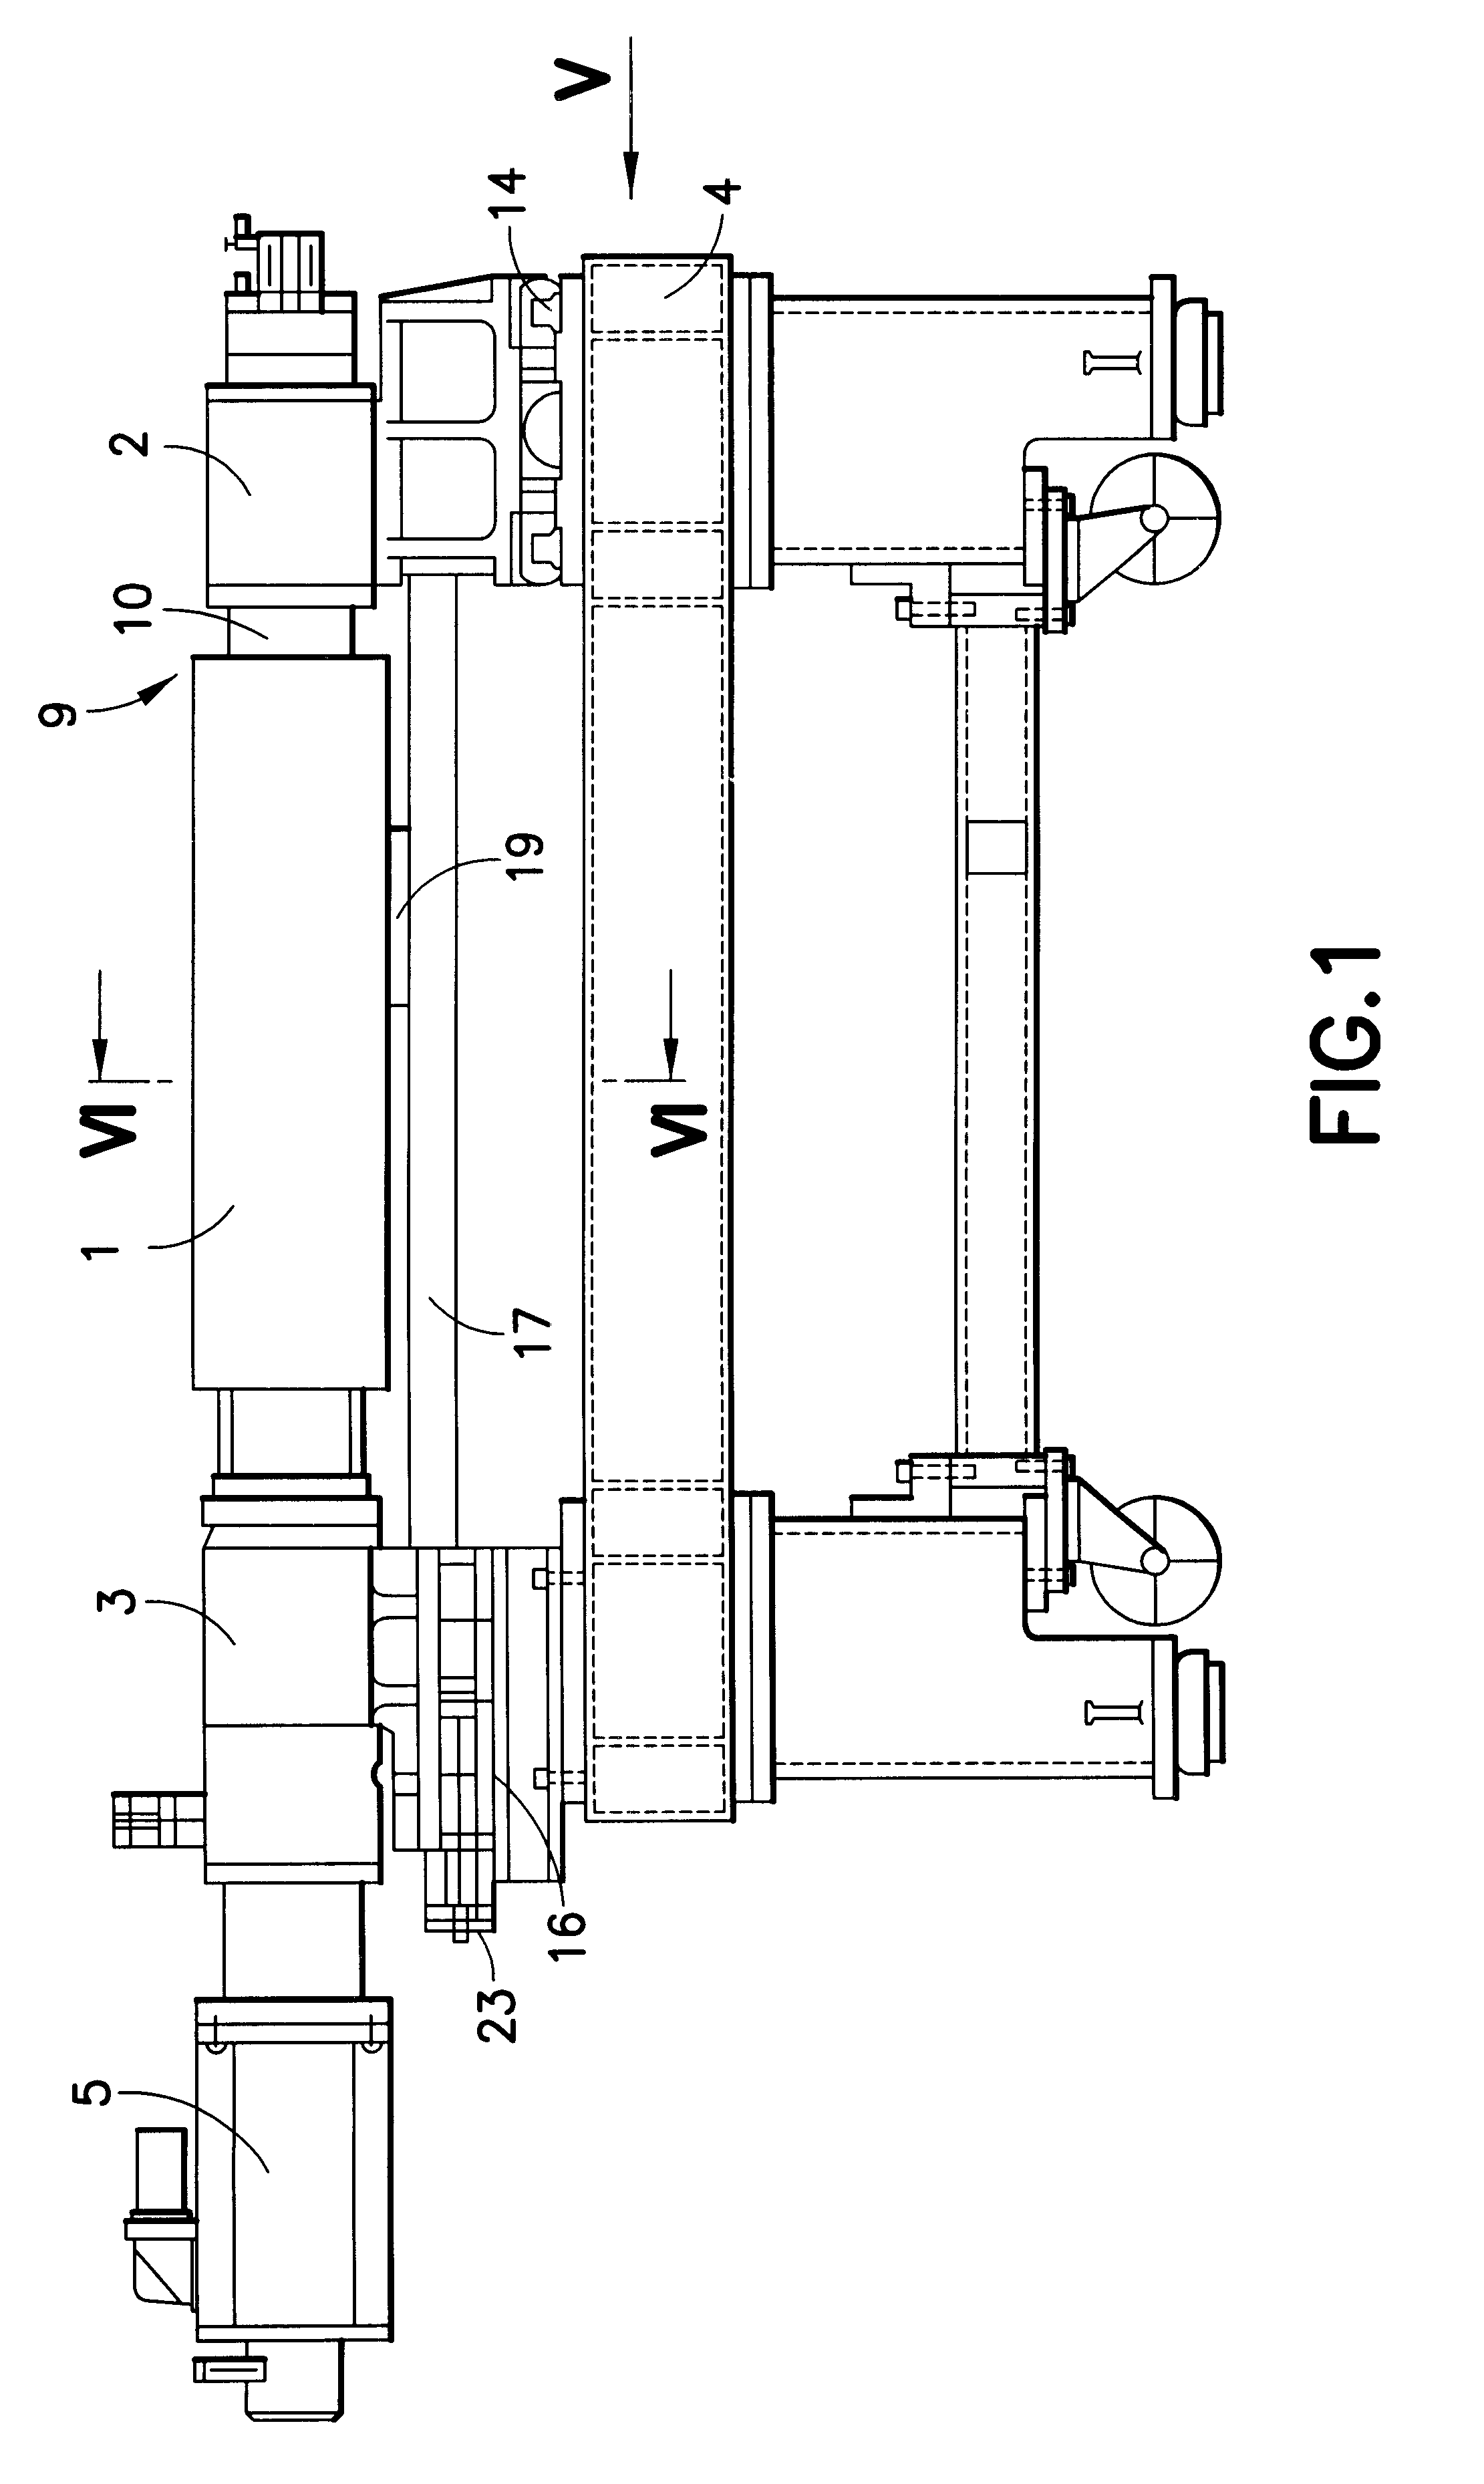 Apparatus for producing printing plates having movable journal for axial removal of plate